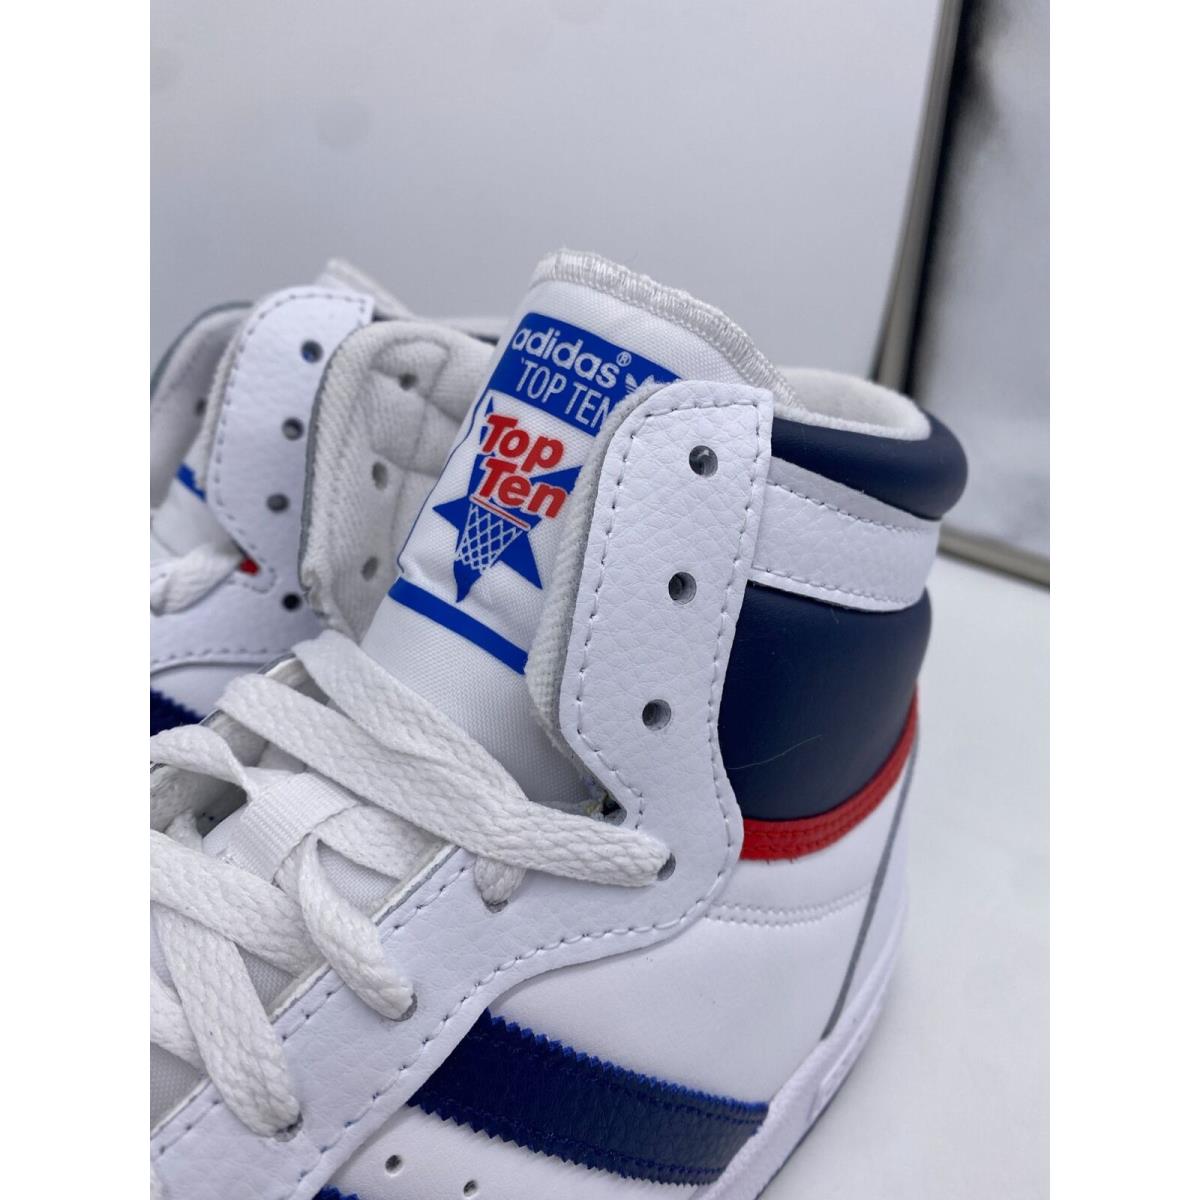 Adidas shoes  - white/blue/red 2